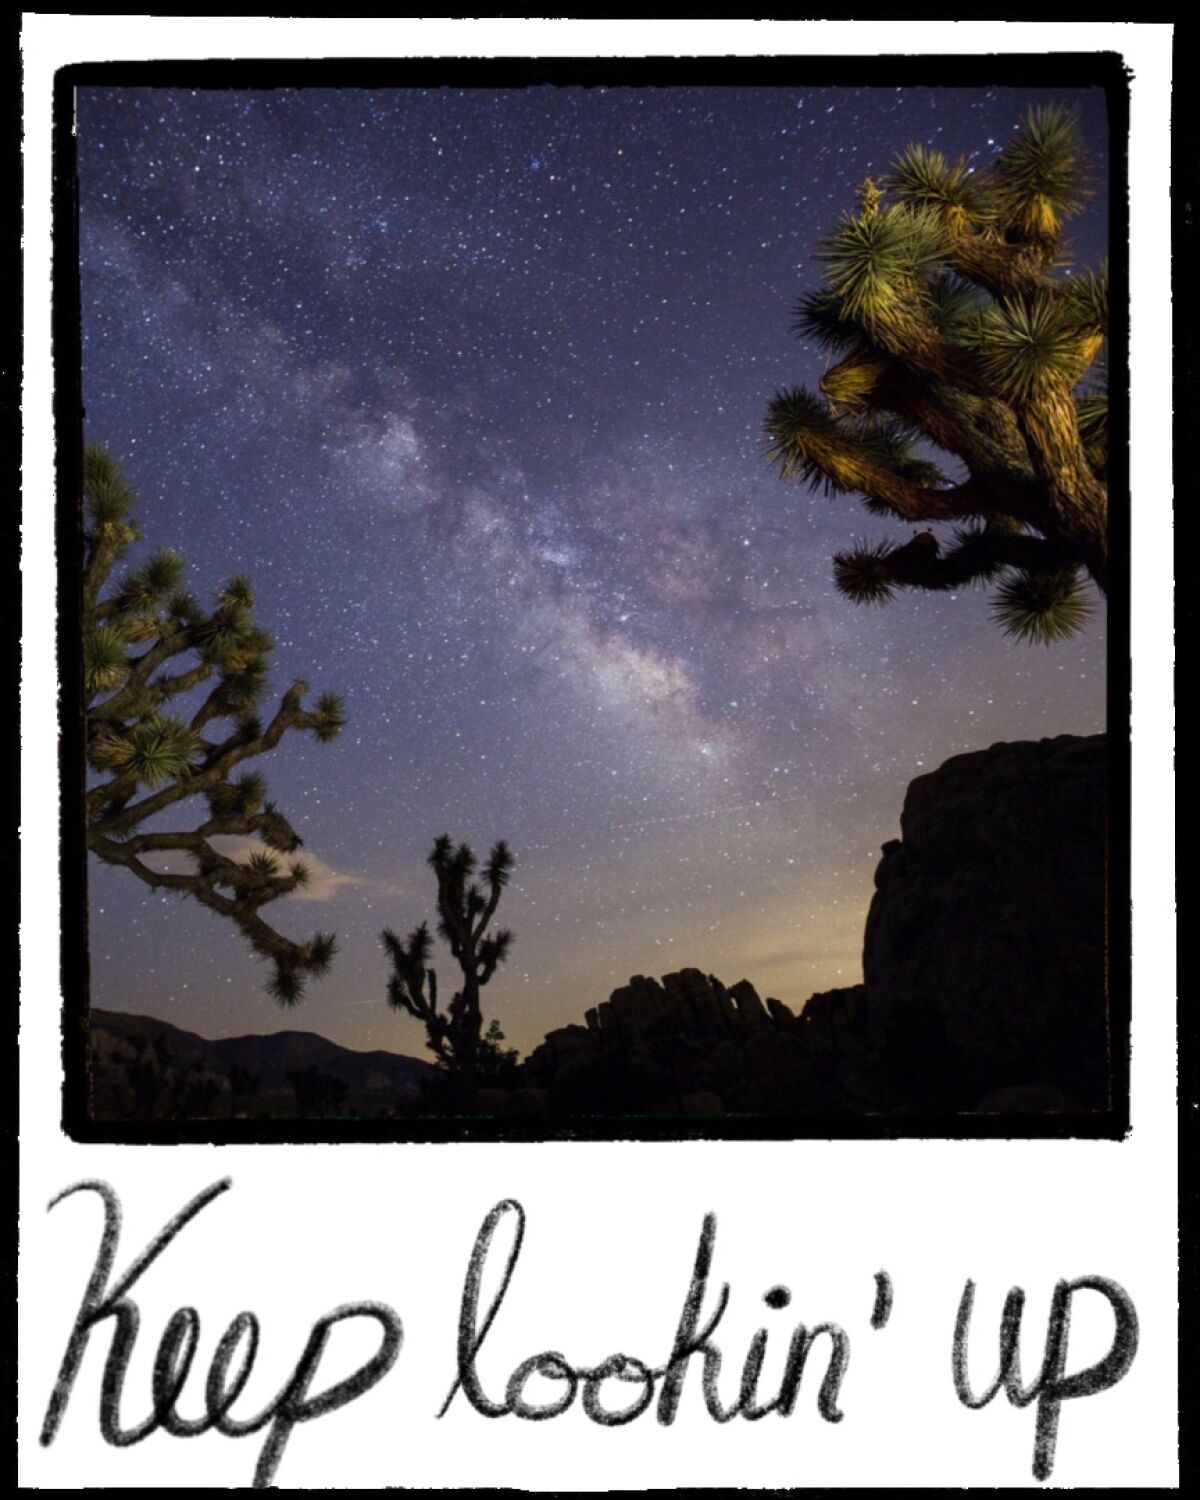 Illustrated Polaroid with a photo of a Joshua tree against the night sky.